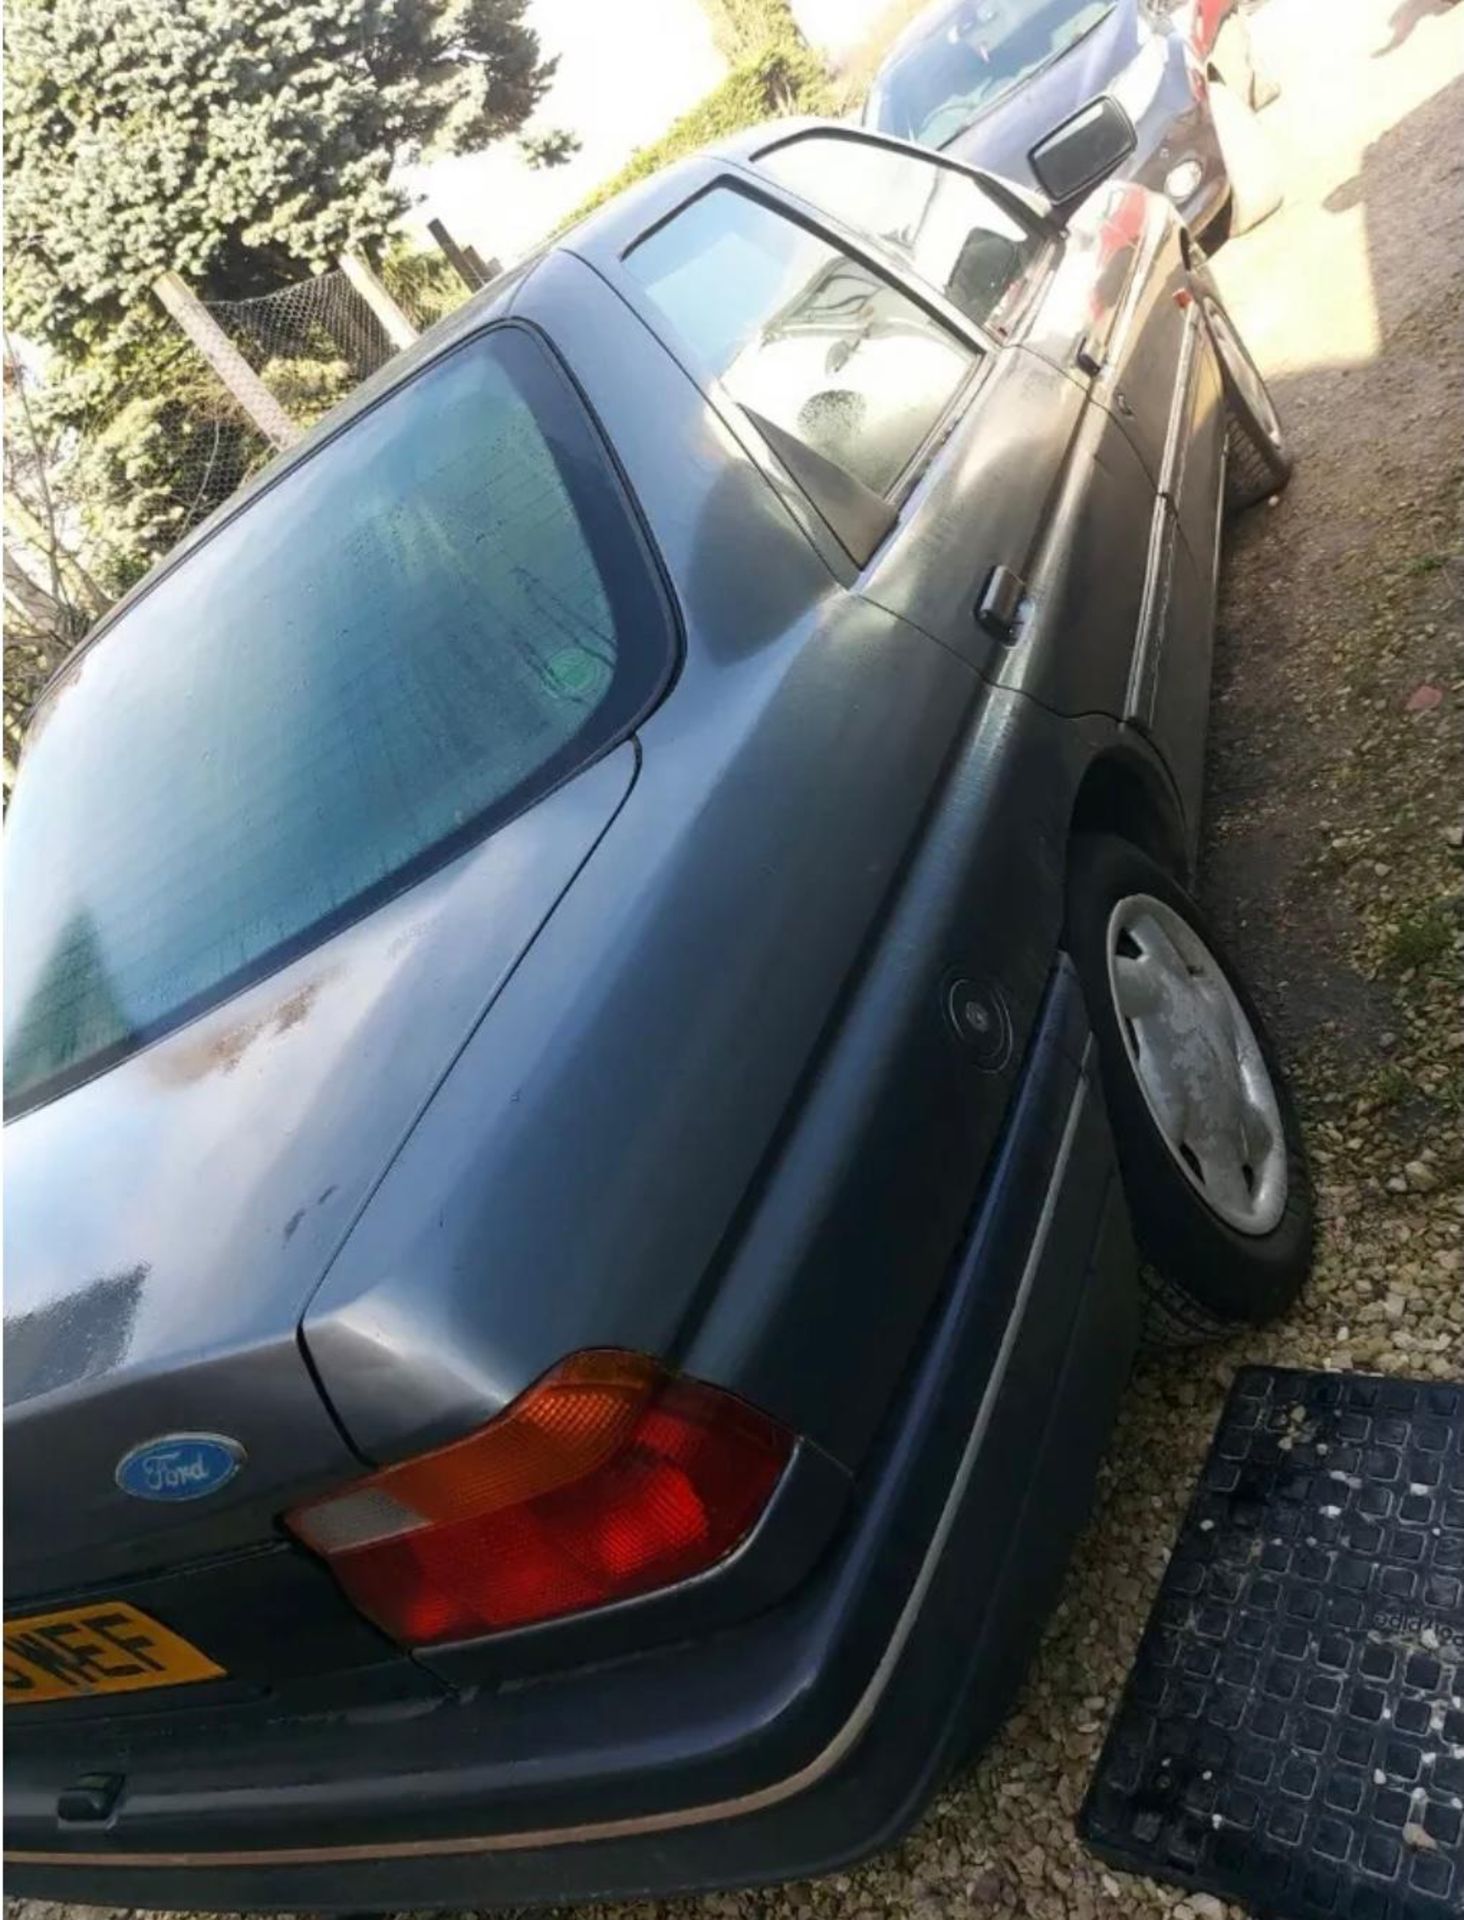 1992 FORD ORION LX AUTO, GREY, PETROL, AUTO VARIABLE 1 GEARS, 4 PREVIOUS KEEPERS, NO VAT - Image 5 of 8